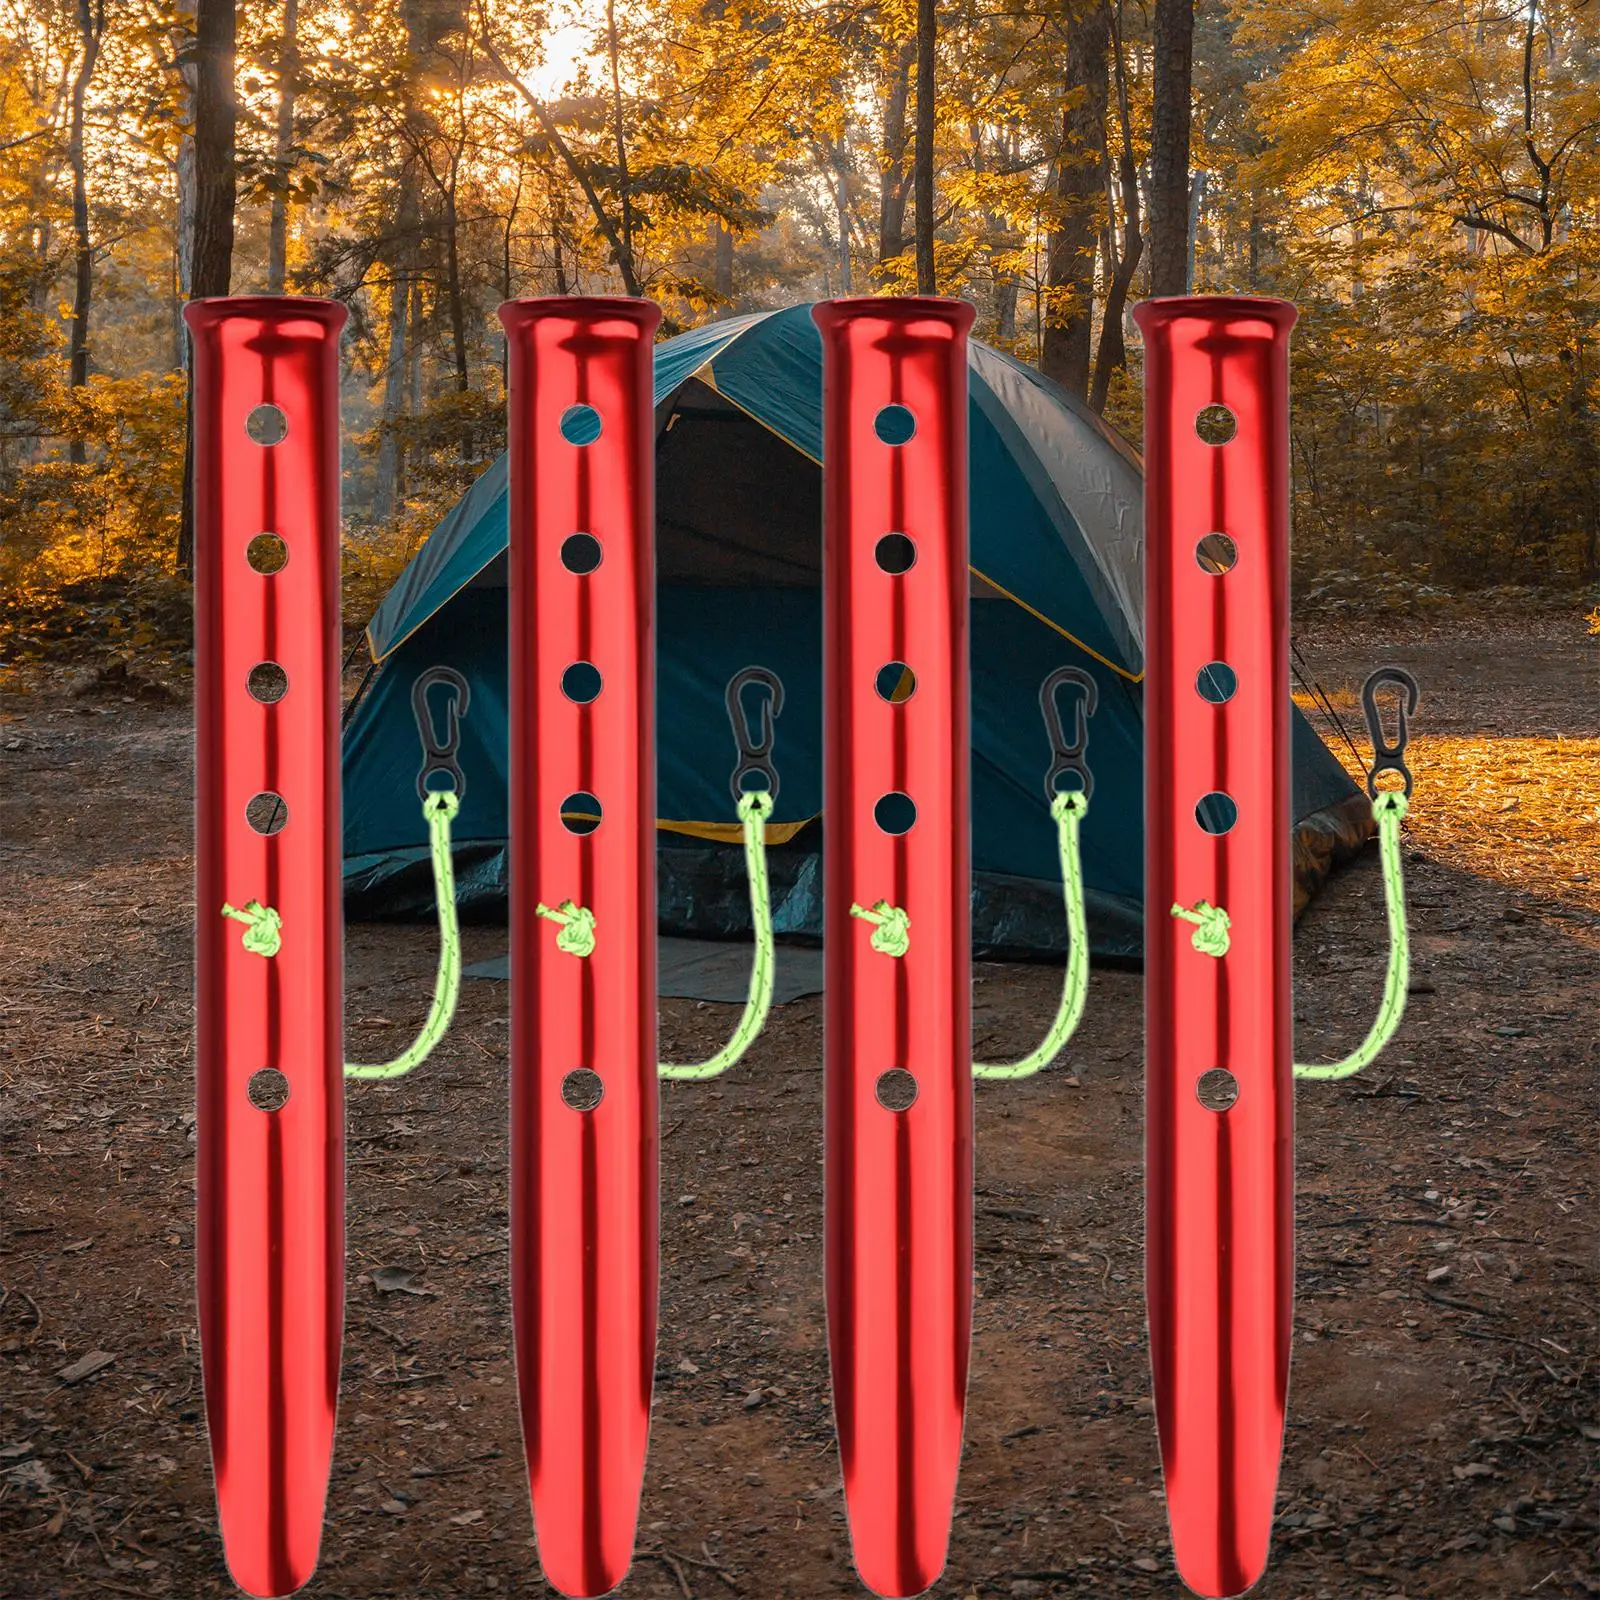 4Pcs Metal Tent Pegs Peg Ground Anchor U Shaped Camping Pegs Loose Sand Camping Stakes for Backpacking Beach Outdoor